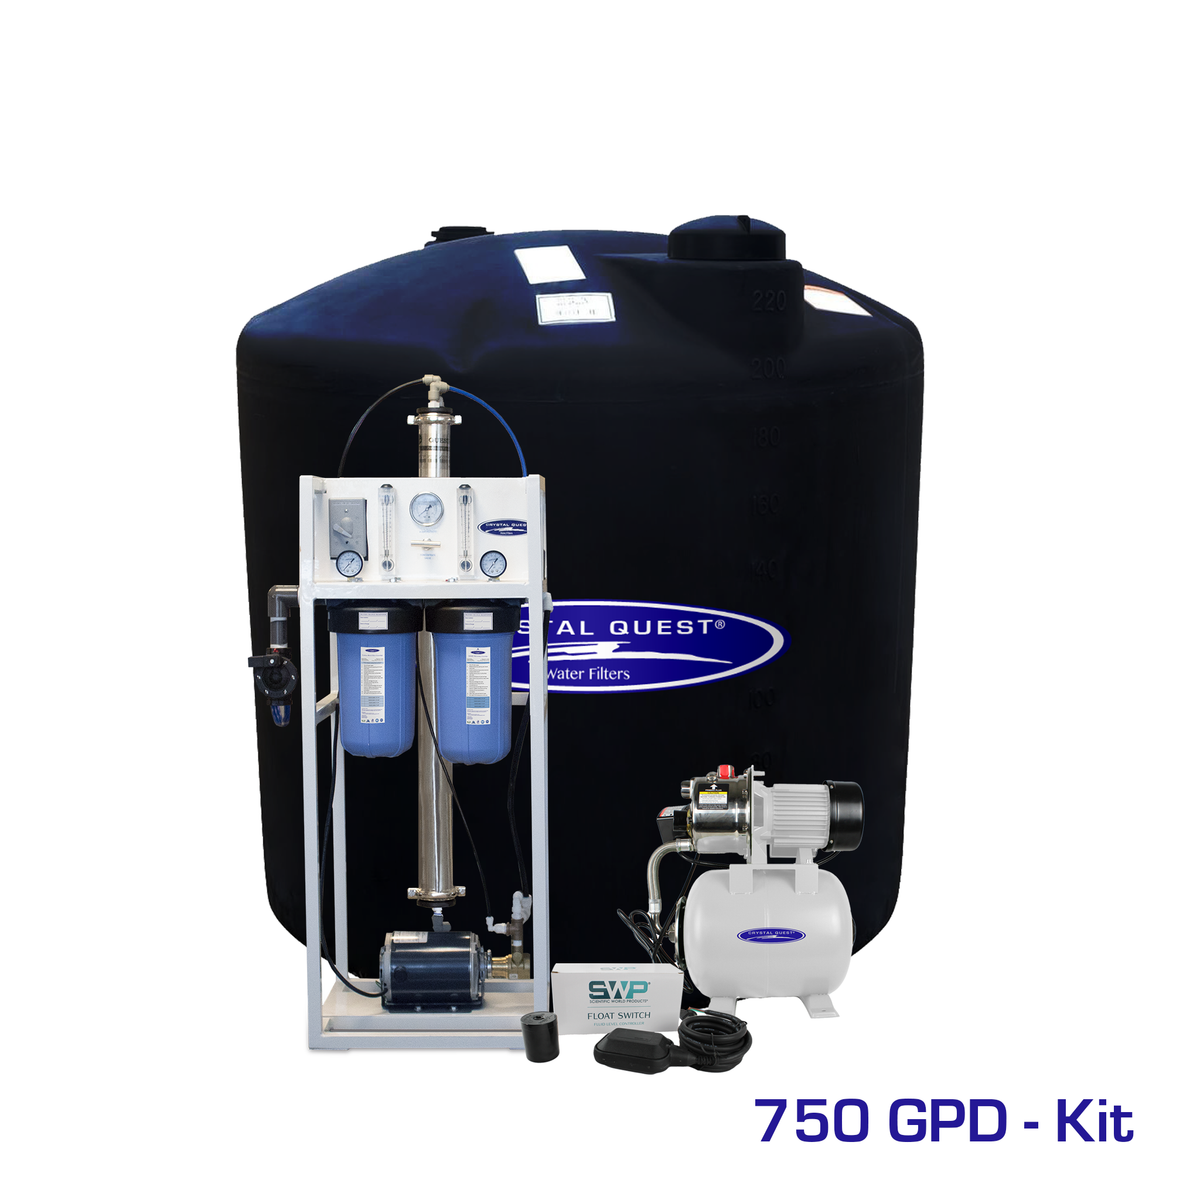 750 GPD / Add Storage Tank Kit (220 Gal) Commercial Mid-Flow Reverse Osmosis System (500-7000 GPD) - Commercial - Crystal Quest